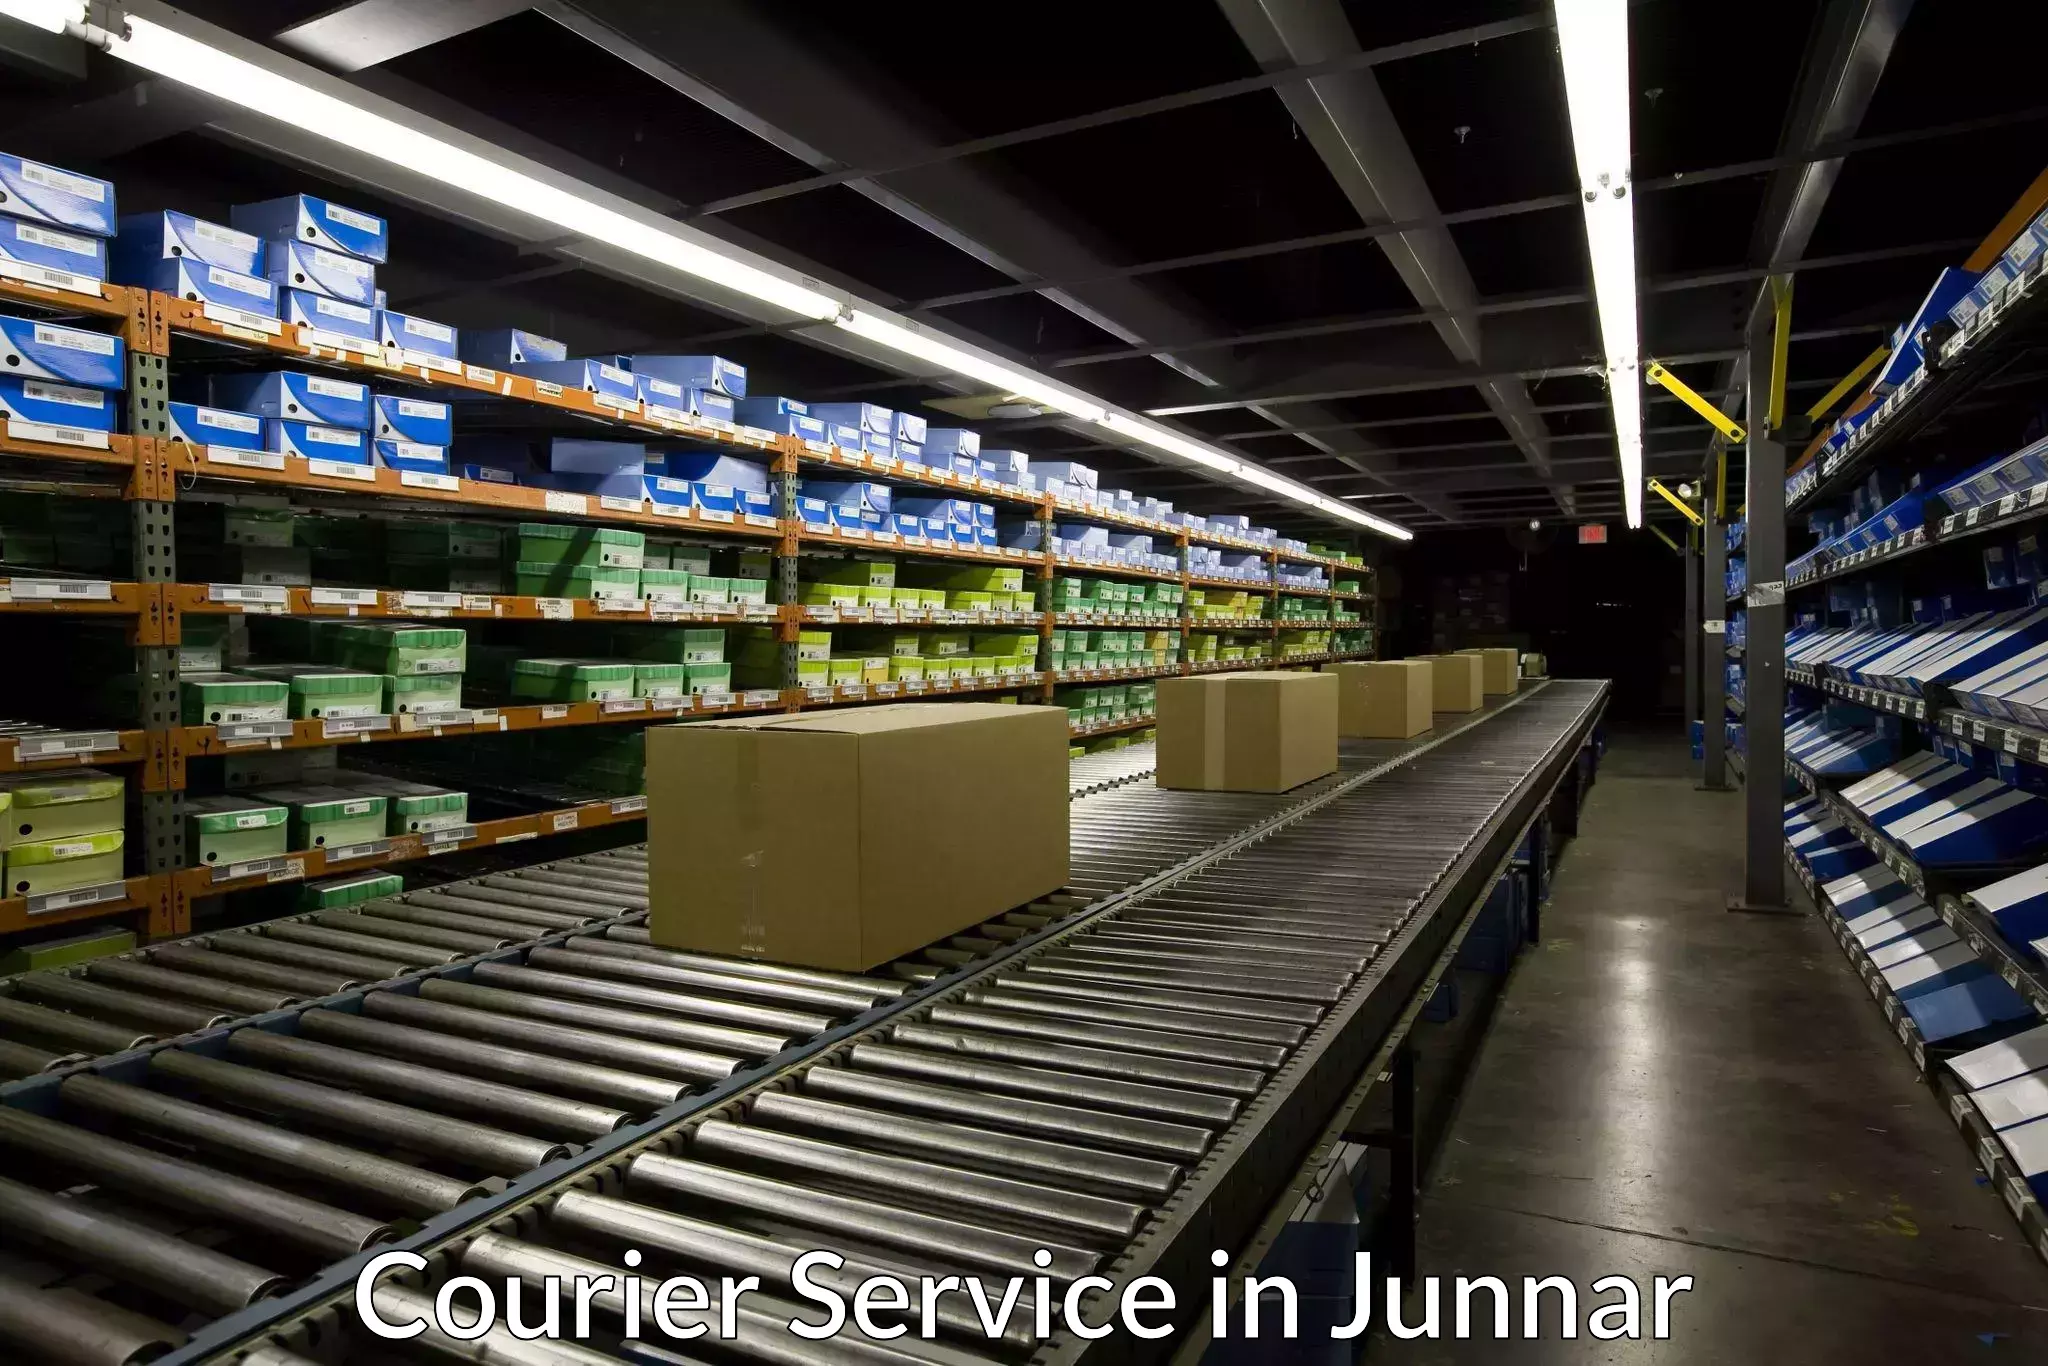 Logistics and distribution in Junnar